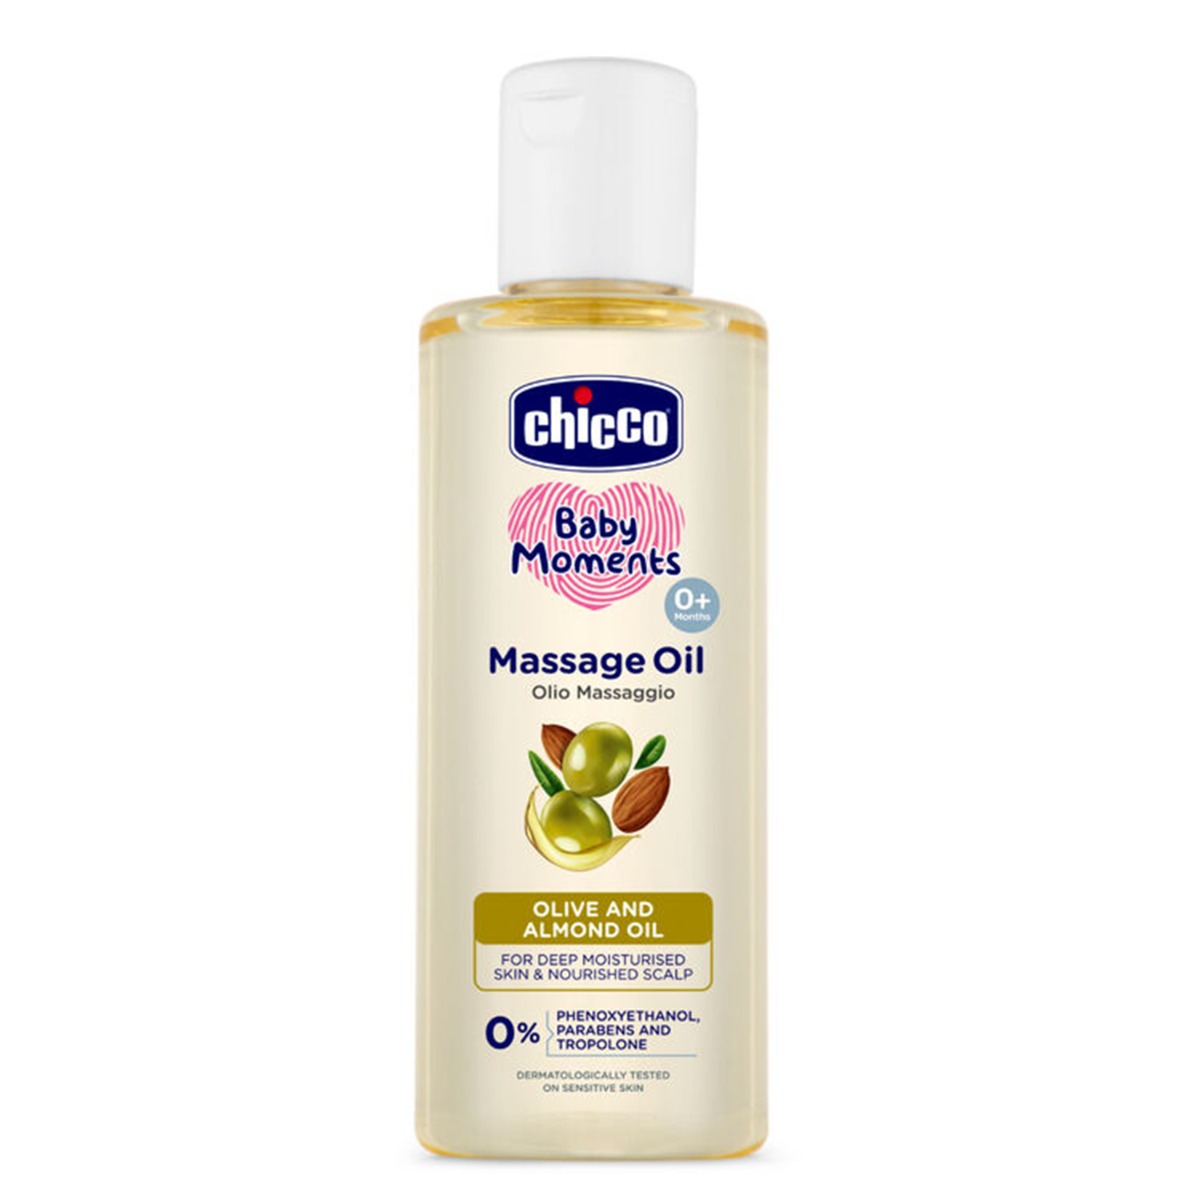 Chicco Massage Oil Olive And Almond Oil, 200ml